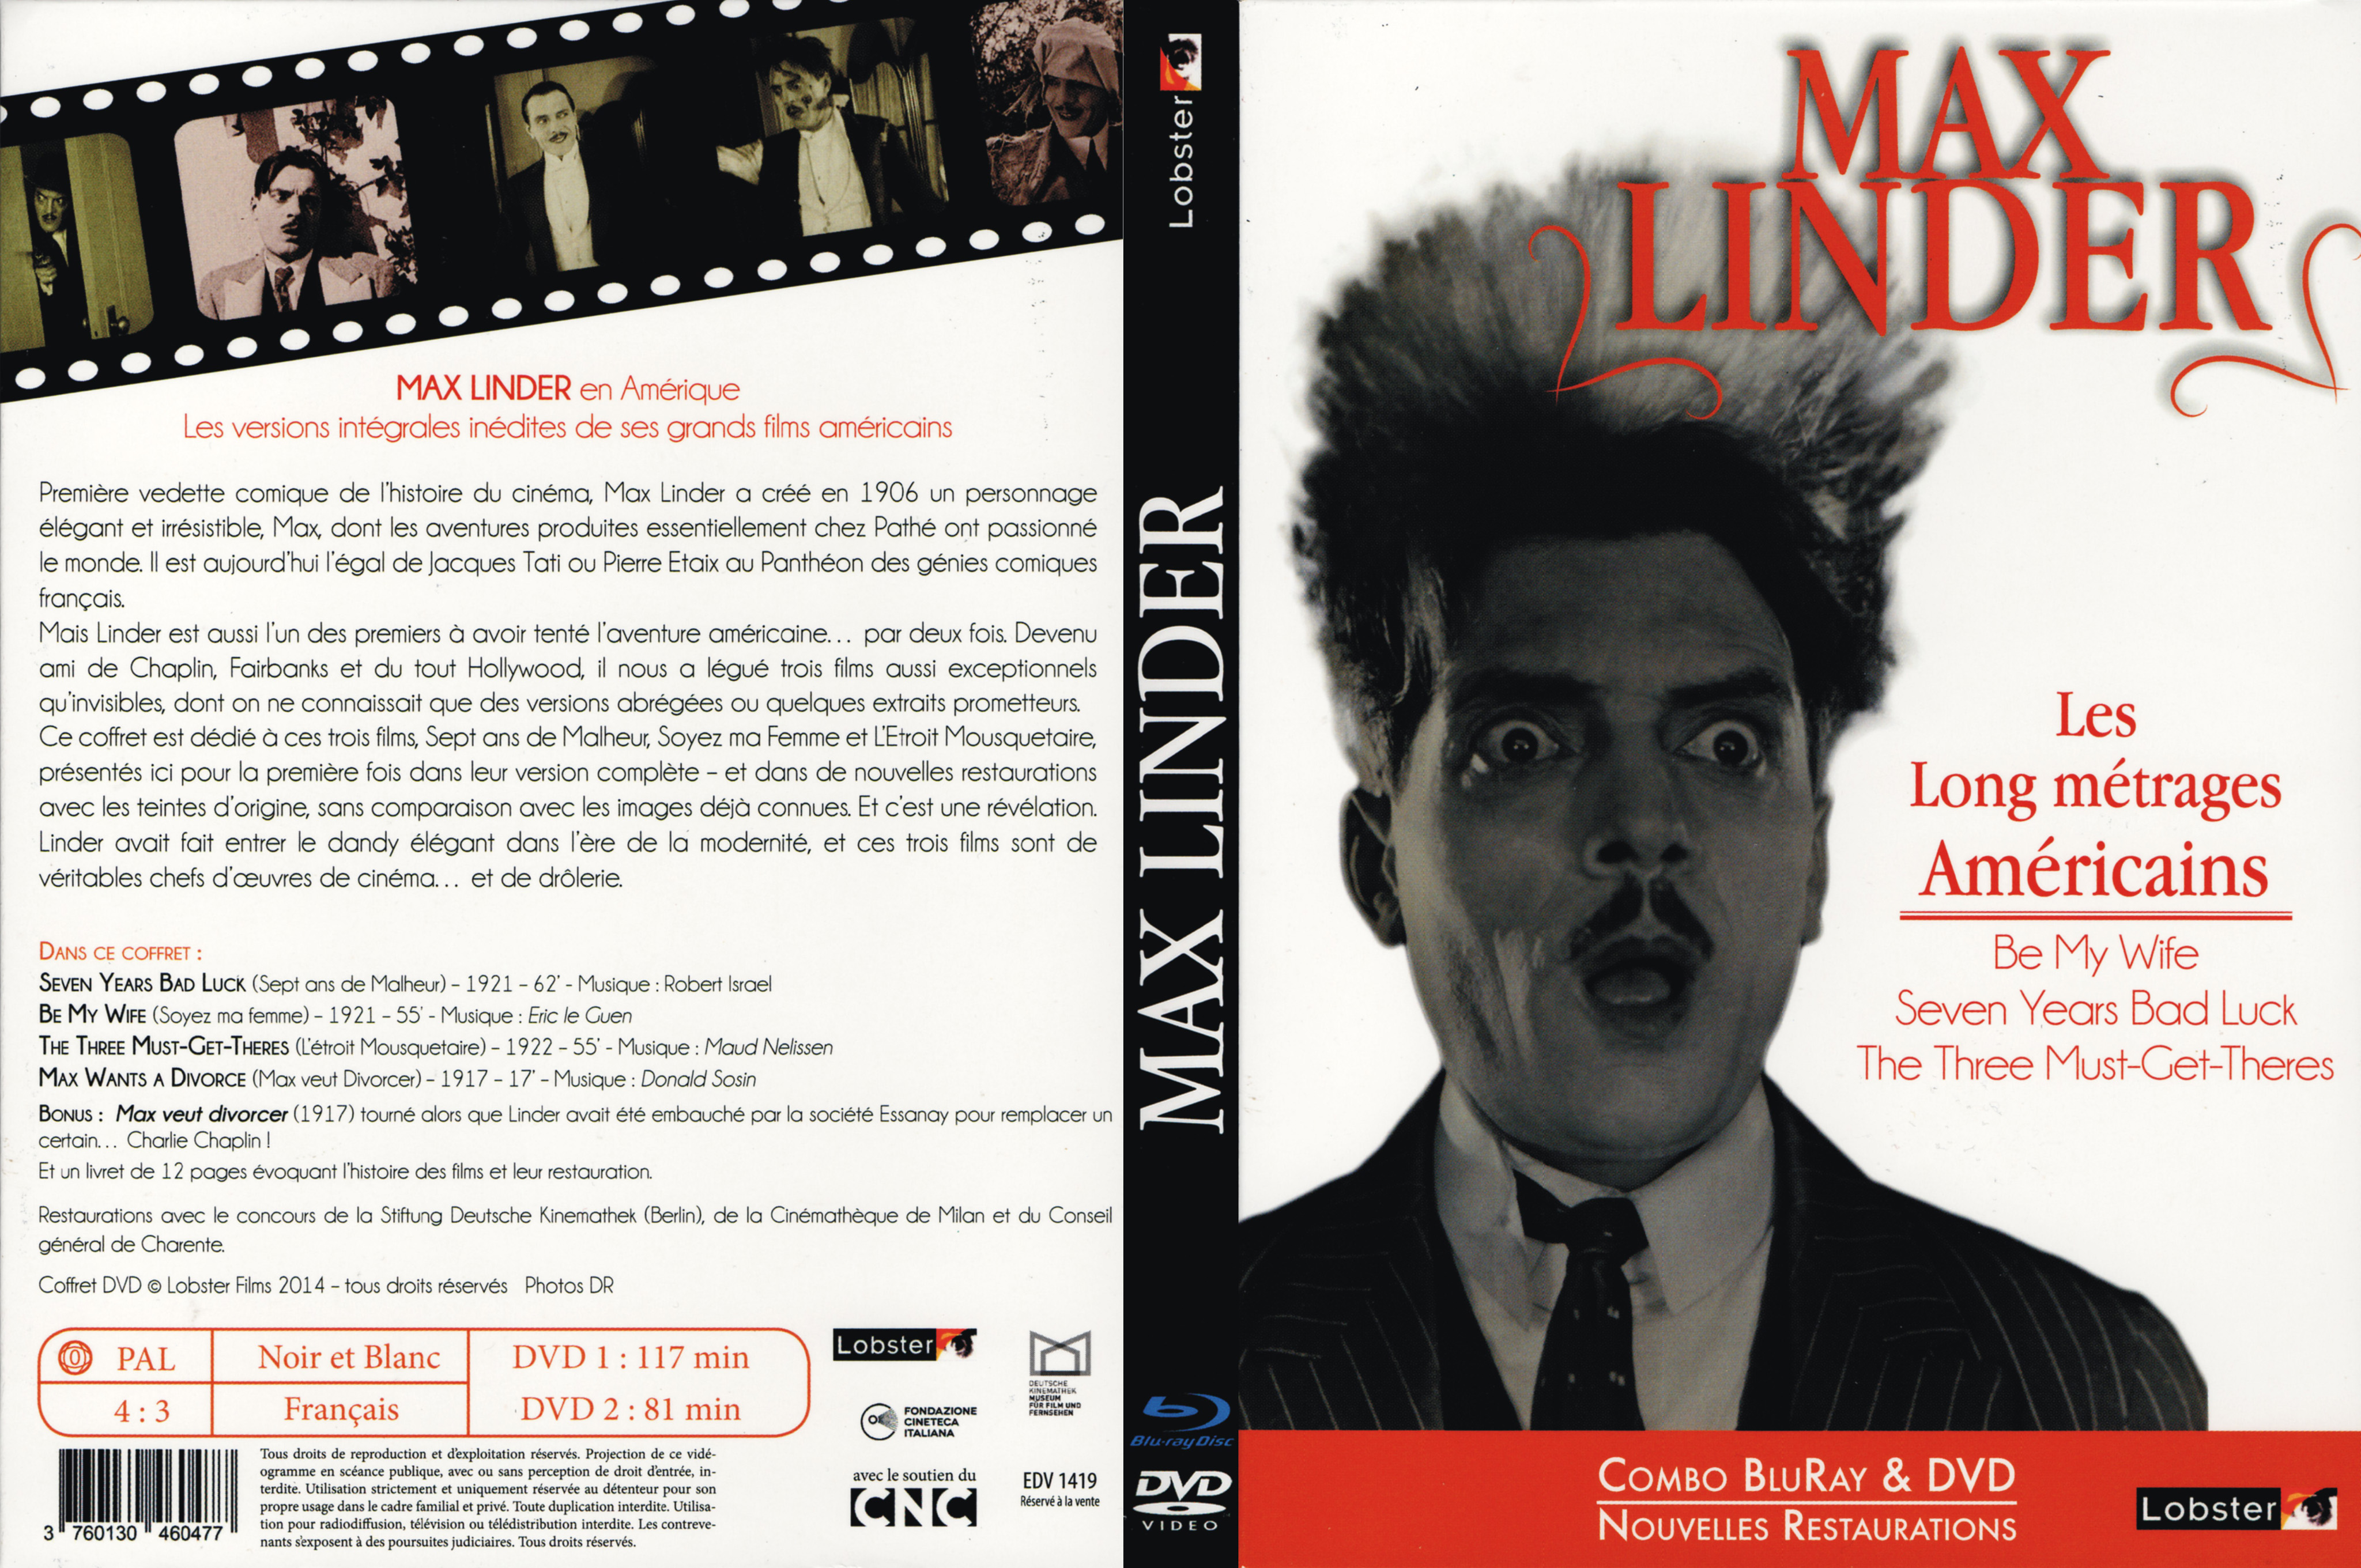 Jaquette DVD Max Linder - Les longs mtrages amricains (BLU-RAY)